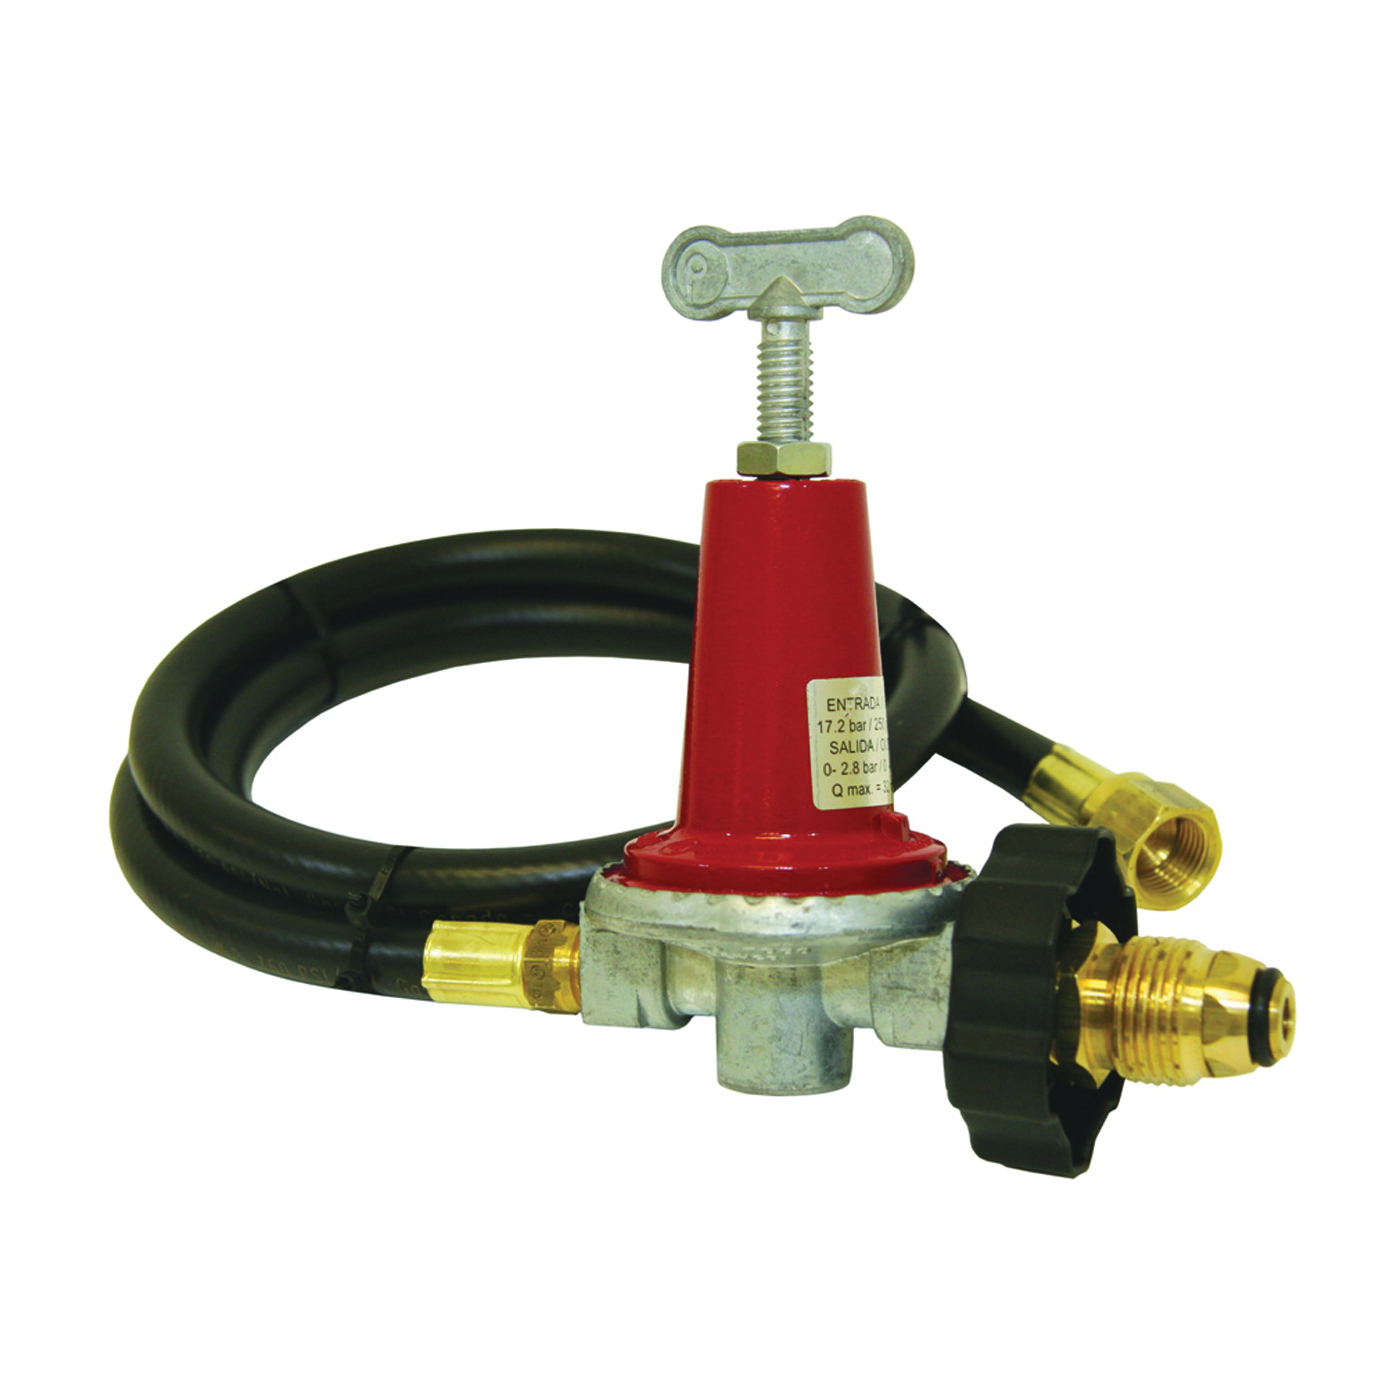 Bayou Classic 5HPR-40 Regulator and LPG Hose, 3/8 in Connection, 48 in L Hose